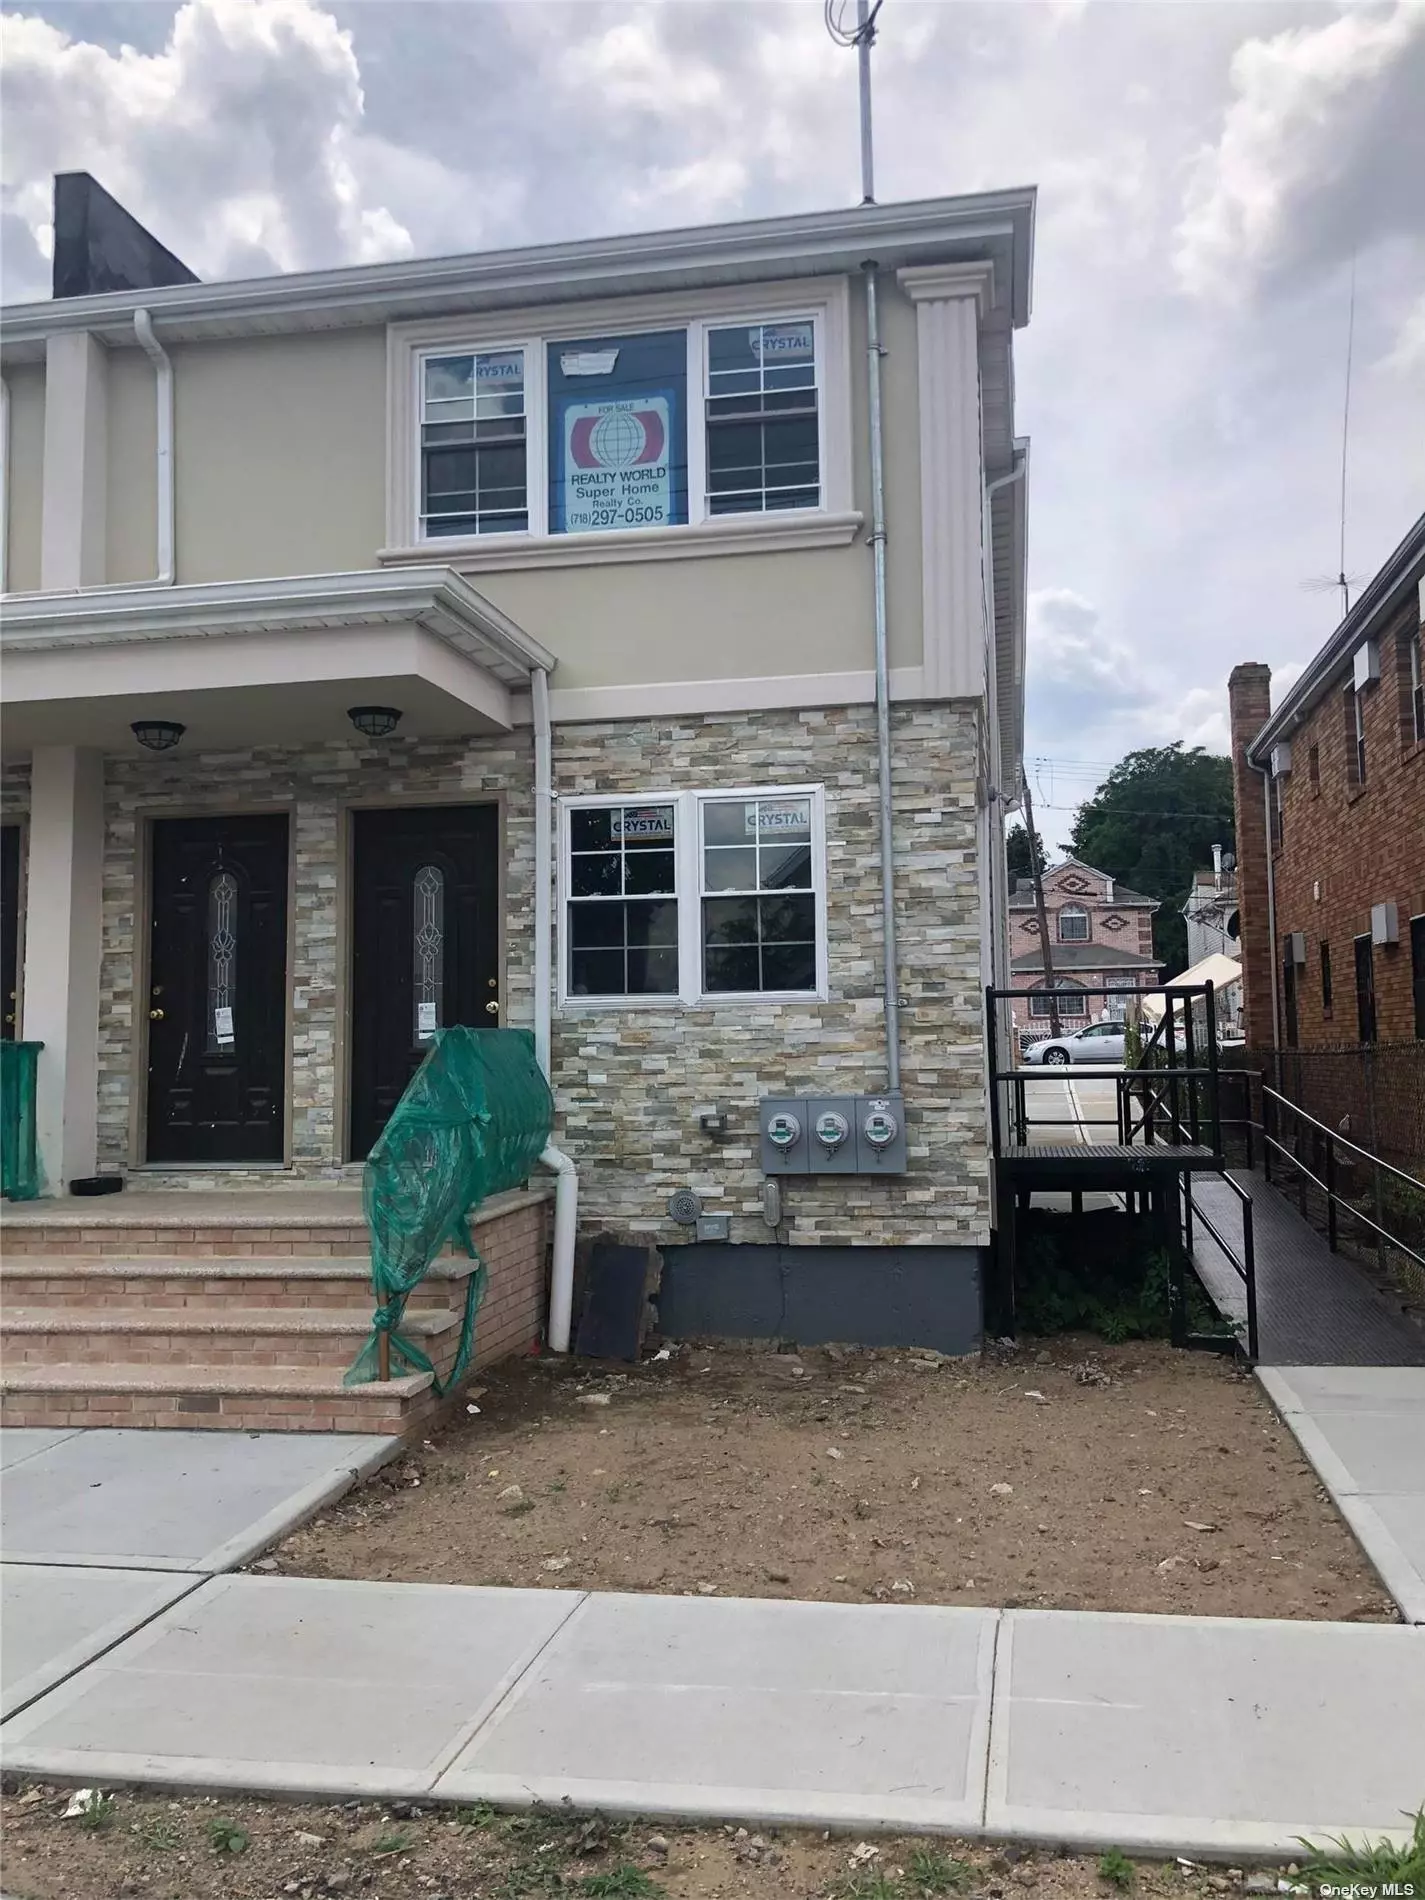 This a brand-new 2 family home with 3 BR, 2 full Bath on each floor, full finished basement with full Bath and private driveway. The house has access to front and back street and the driveway entrance is from back street. The house is centrally located near shopping, store and transportation.